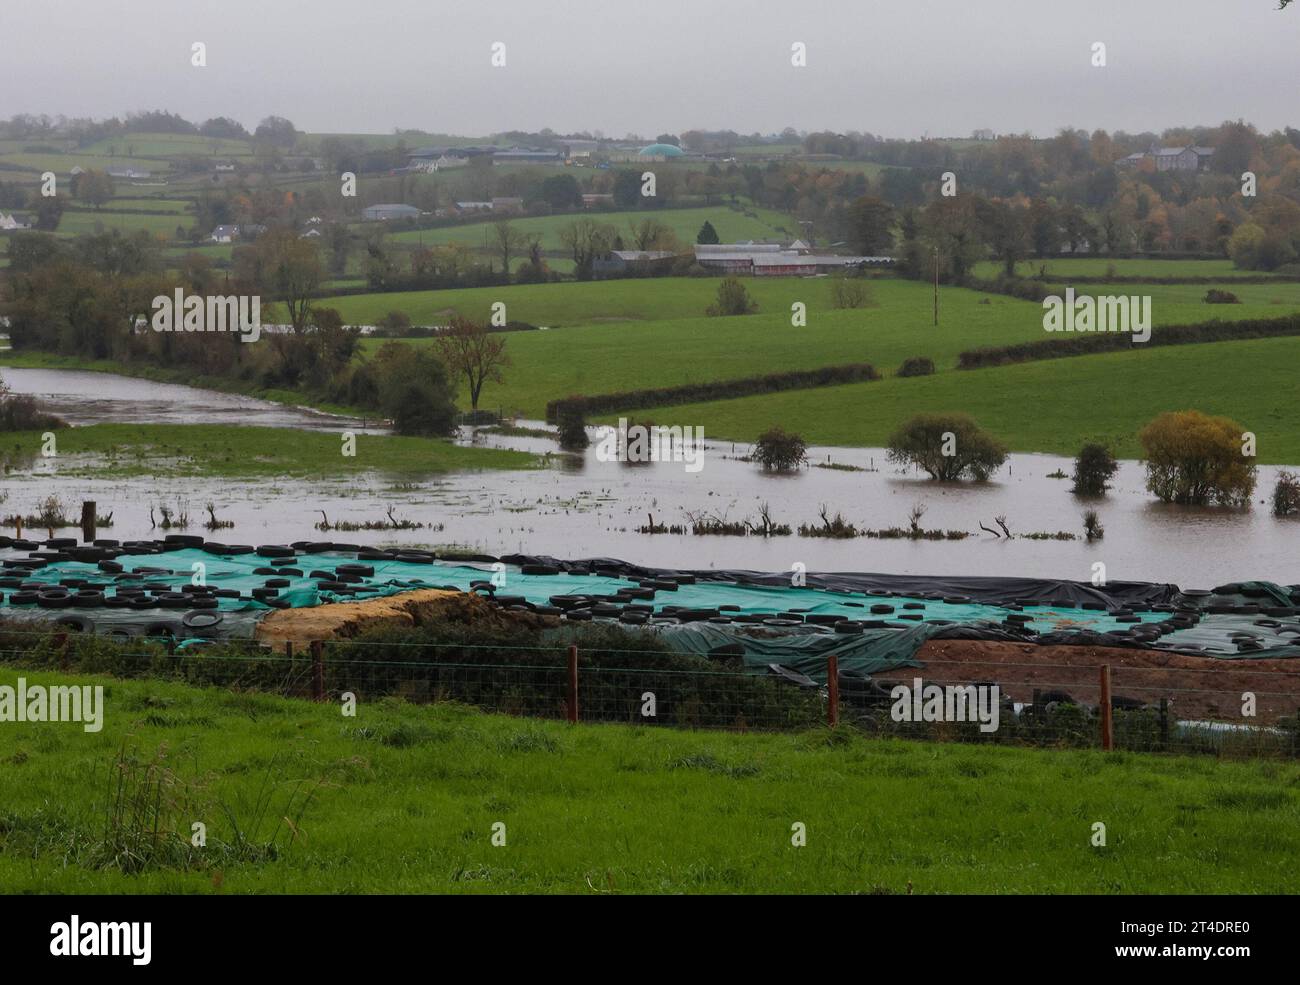 Moira, County Down, Northern Ireland, UK. 30th Oct 2023. UK weather - already over its banks the River Lagan rose higher following more heavy rain overnight. Surrounding farmland in the Lagan Valley is under substantial water for this time of year and the levels will remain high with further rain warnings in place between now and Friday as another storm-front rolls in. Credit: CAZIMB/Alay Live News. Stock Photo